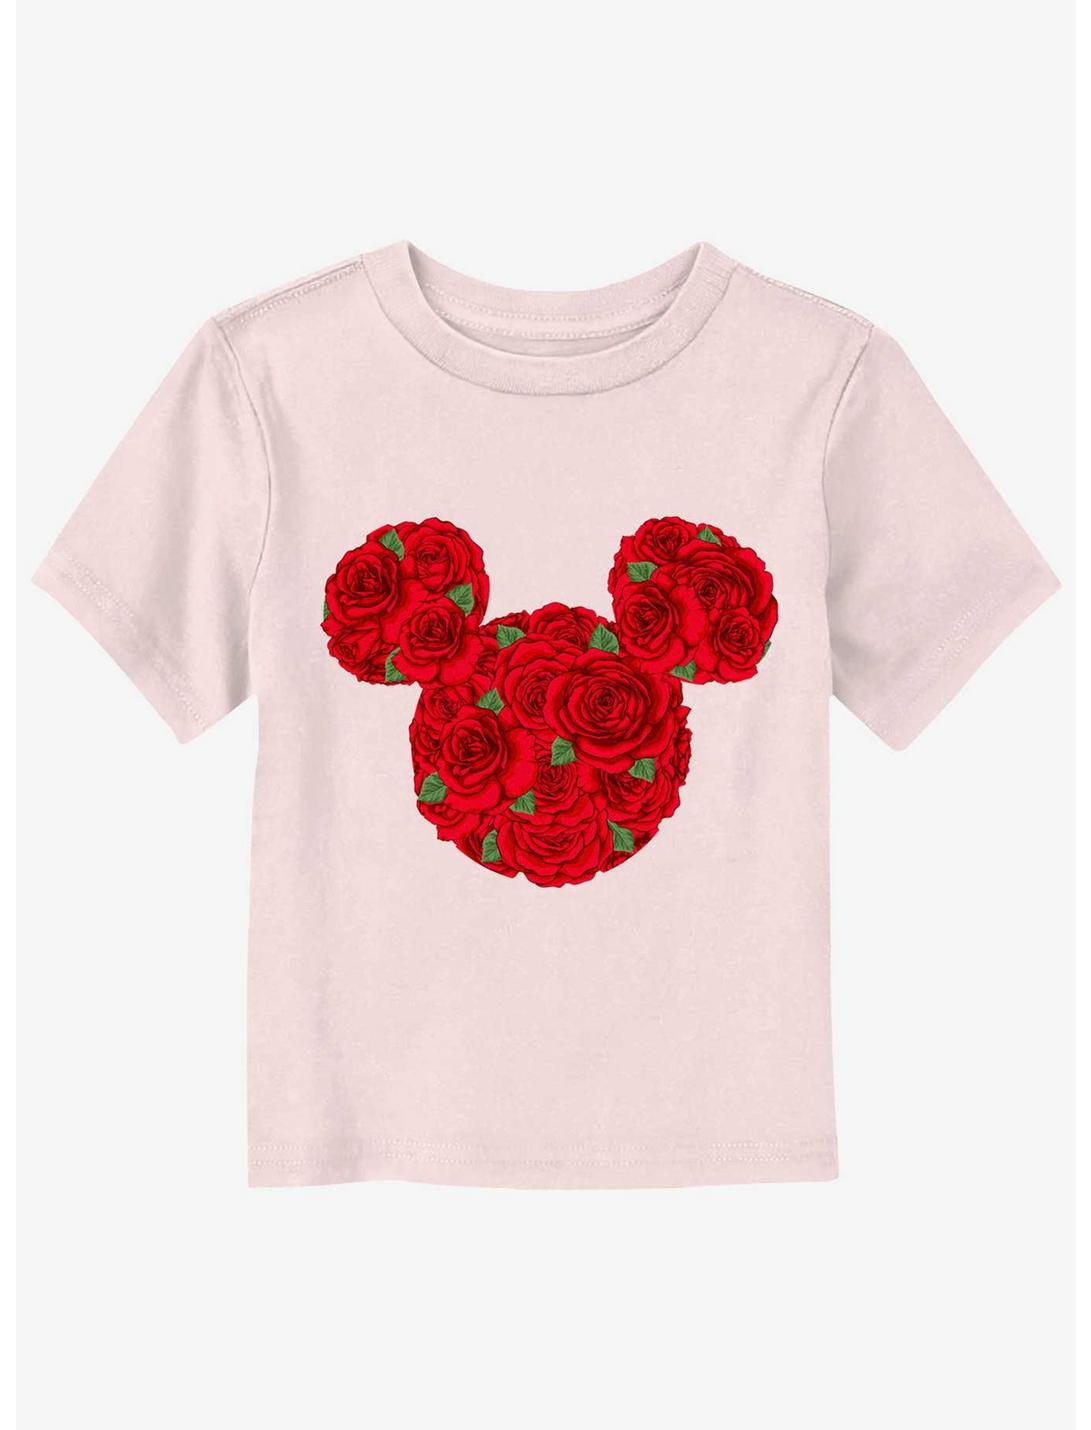 Disney Minnie Mouse Mickey Mouse Roses Toddler T-Shirt, LIGHT PINK, hi-res